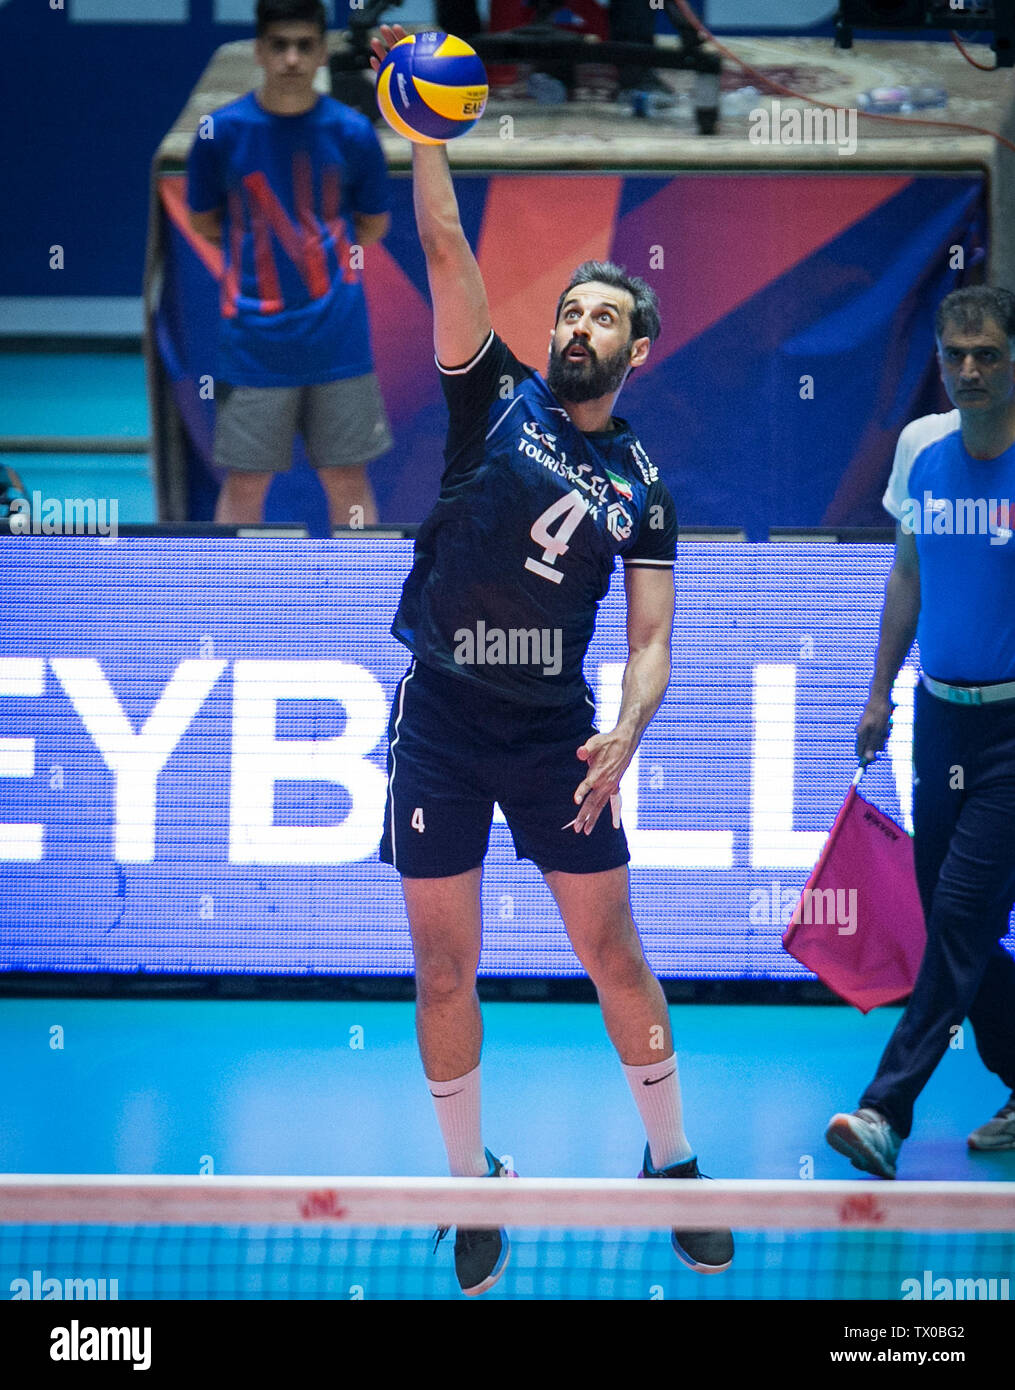 Ardabil, Iran. 23rd June, 2019. Mir Saeid Marouflakrani of Iran spikes the  ball during the FIVB Volleyball Nations League match between Iran and  France in Ardabil, Iran, June 23, 2019. France won